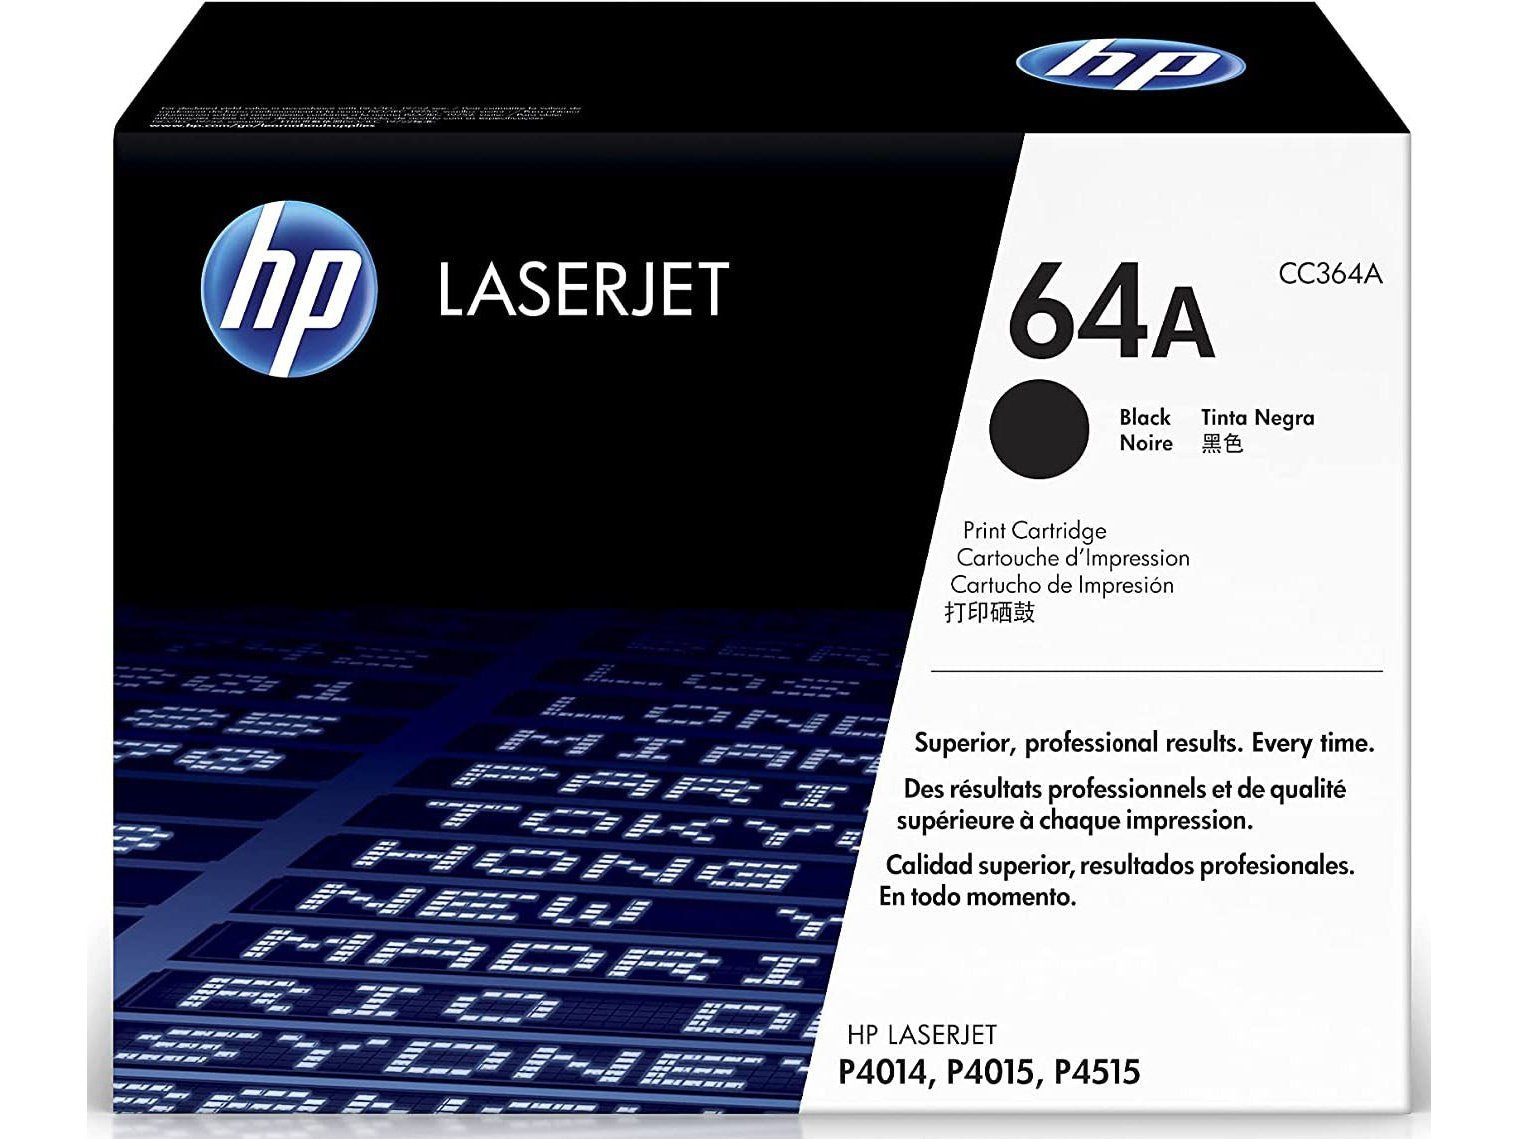 ICU Compatible/ OEM Get HP ICUCC364A Yields 10000 Pages 64A Black Laser Toner Cartridge